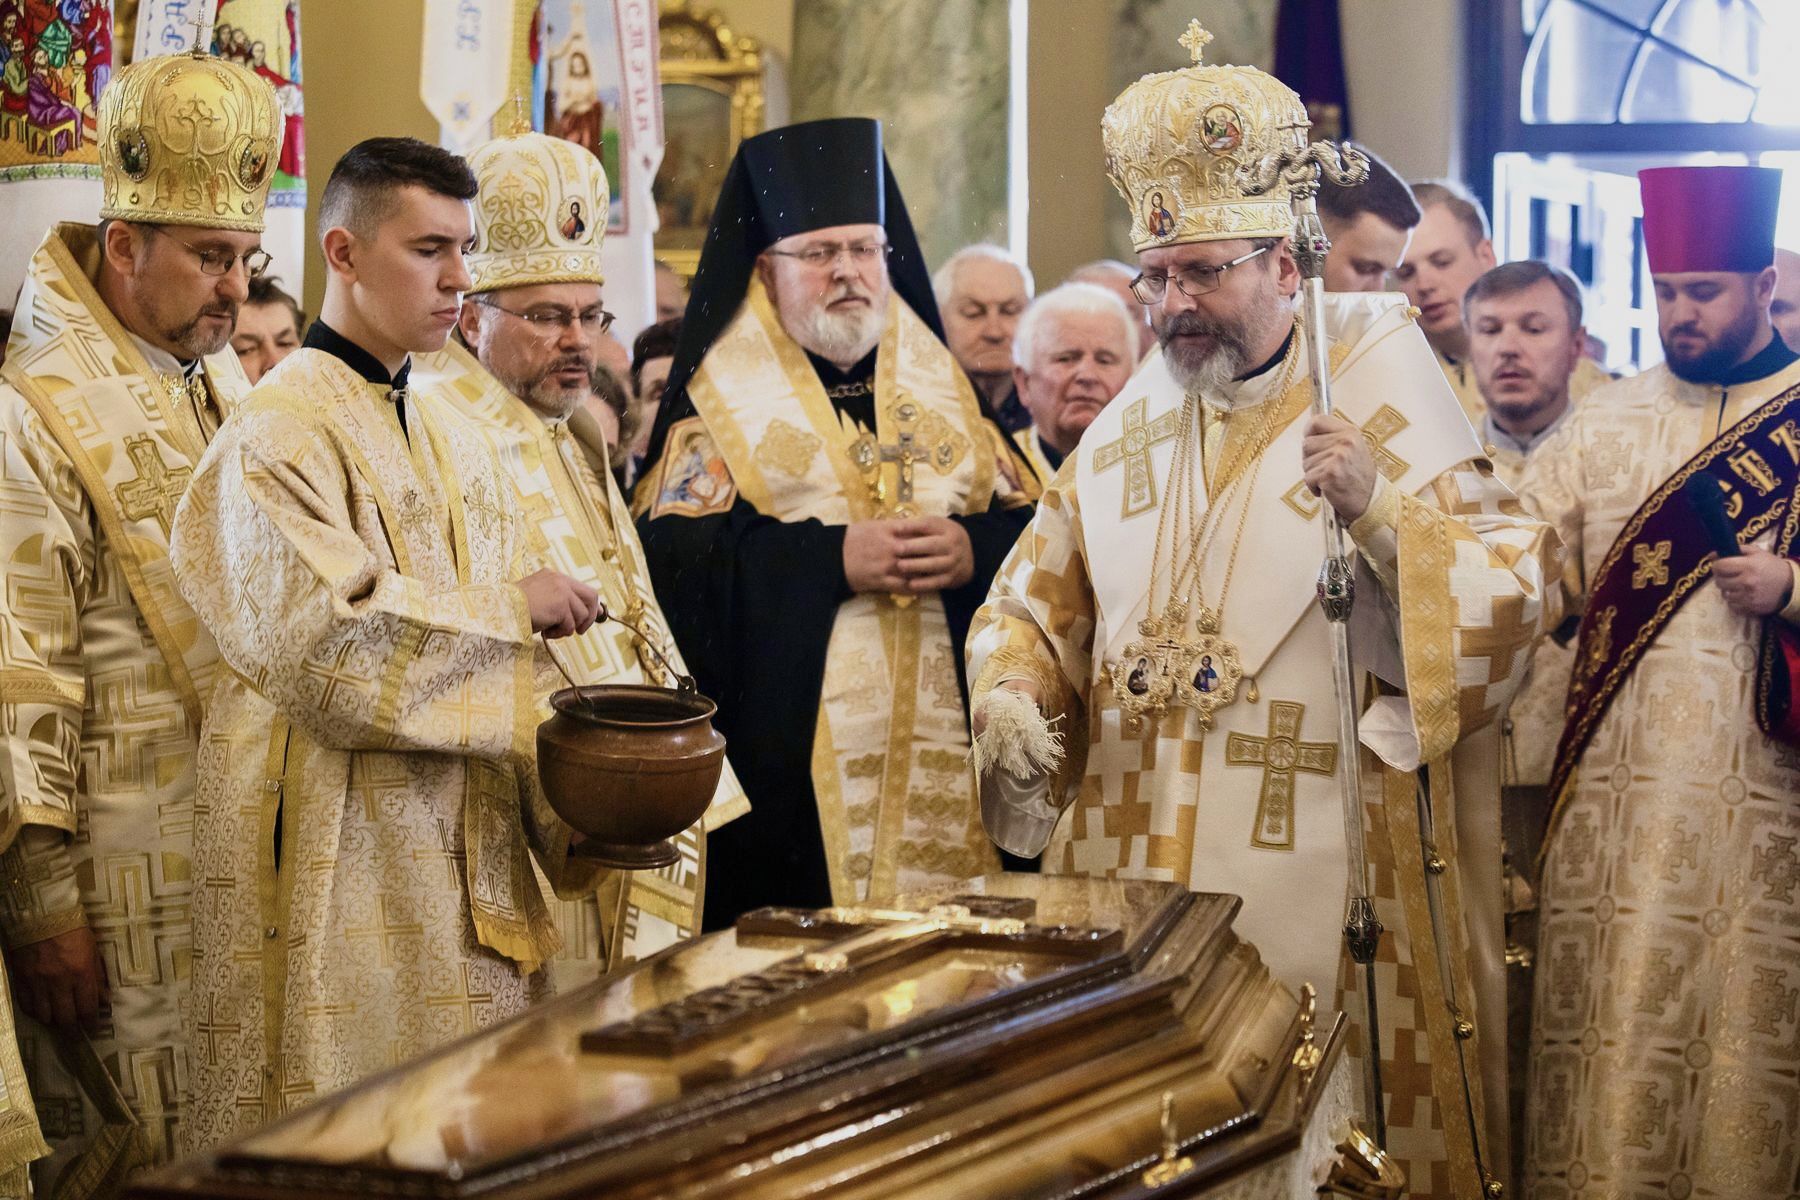  “Dear father, anticipate meeting you in the arms of the Heavenly Father”: His Beatitude Sviatoslav at his father’s funeral